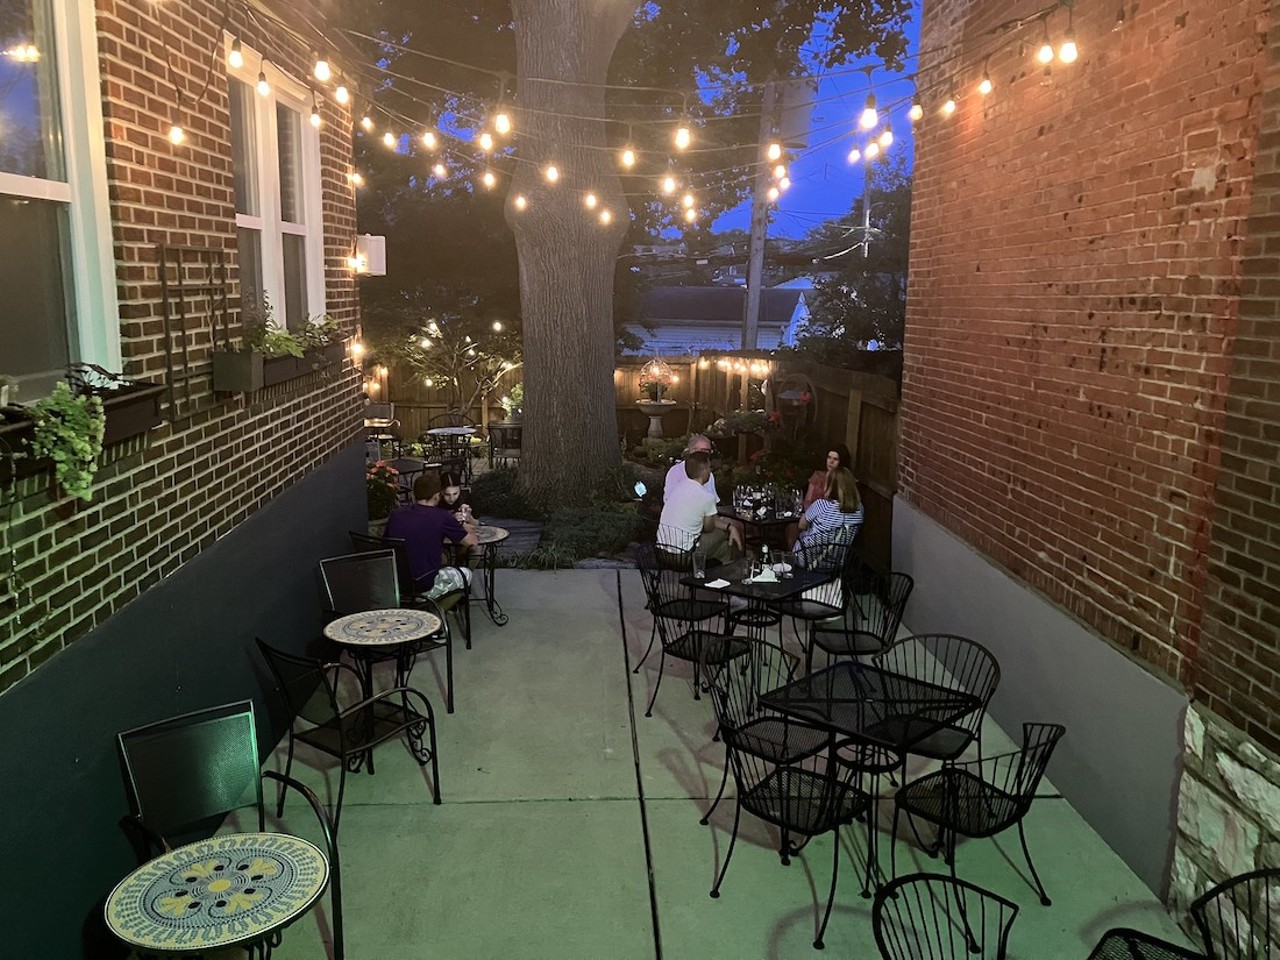 Novella
(5510 South Kingshighway Boulevard, 314-680-4226)
Tucked behind this Eastern European bar in deep south city is a little patio just waiting for you and your date, along with a menu of interesting noshes and unusual-for-St. Louis wines.